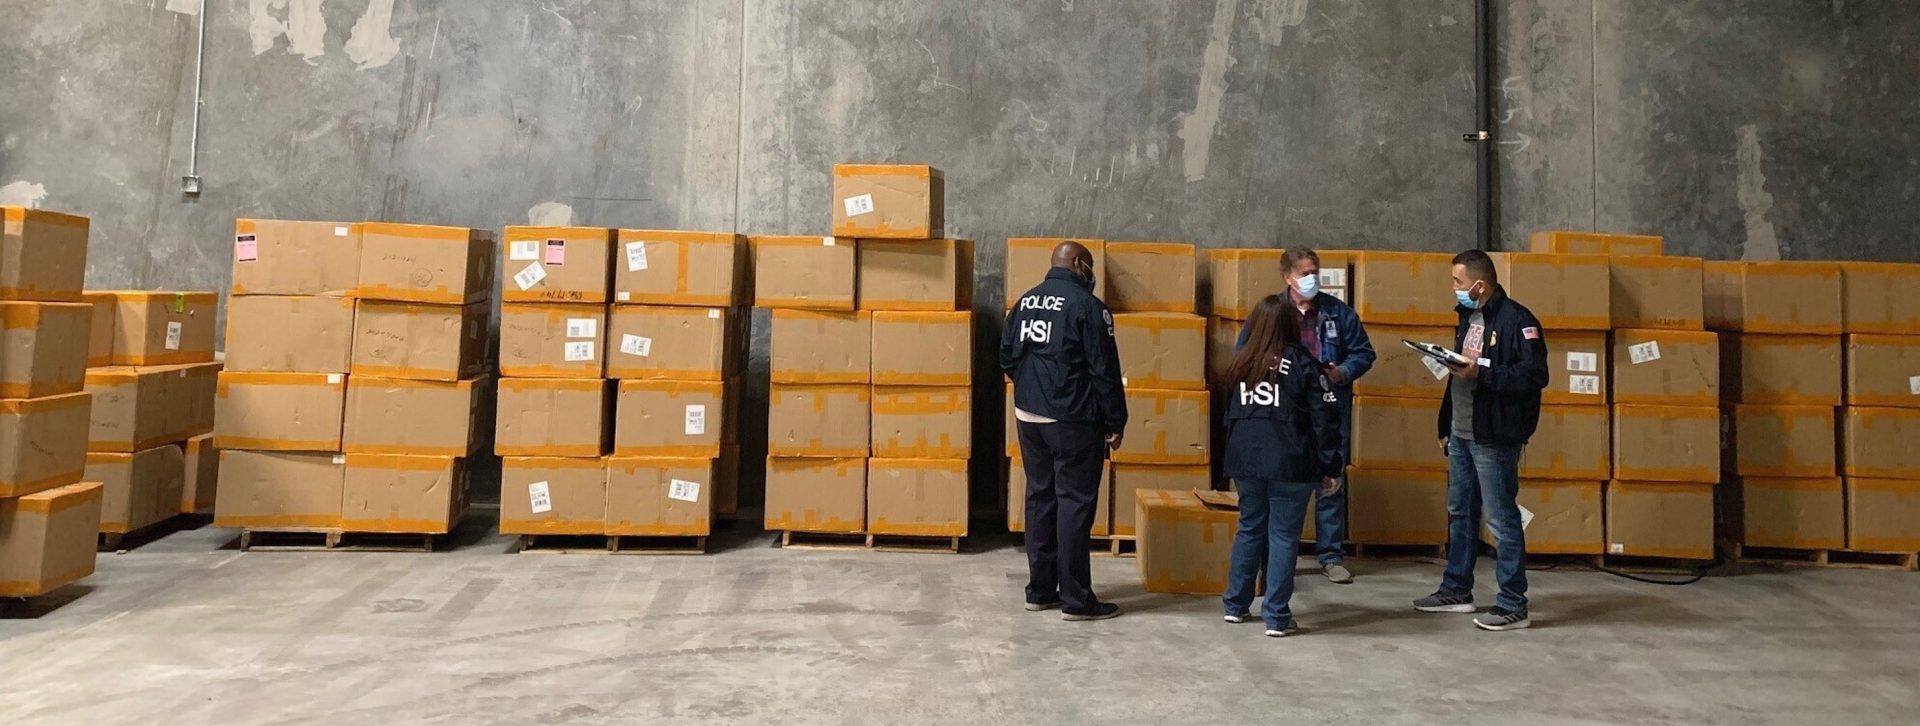 This December 2020, image provided by U.S. Immigration and Customs Enforcement (ICE) shows Homeland Security Investigations El Paso members and U.S. Customs and Border Protection officers working during a seizure of counterfeit N95 surgical masks at an El Paso Port cargo facility in El Paso, Texas. Federal investigators are probing a massive counterfeit N95 mask operation sold in at least five states to hospitals, medical facilities, and government agencies. The fake 3M masks are at best a copyright violations and at worst unsafe fakes that put unknowing health care workers at grave risk for coronavirus. And they are becoming increasingly difficult to spot.